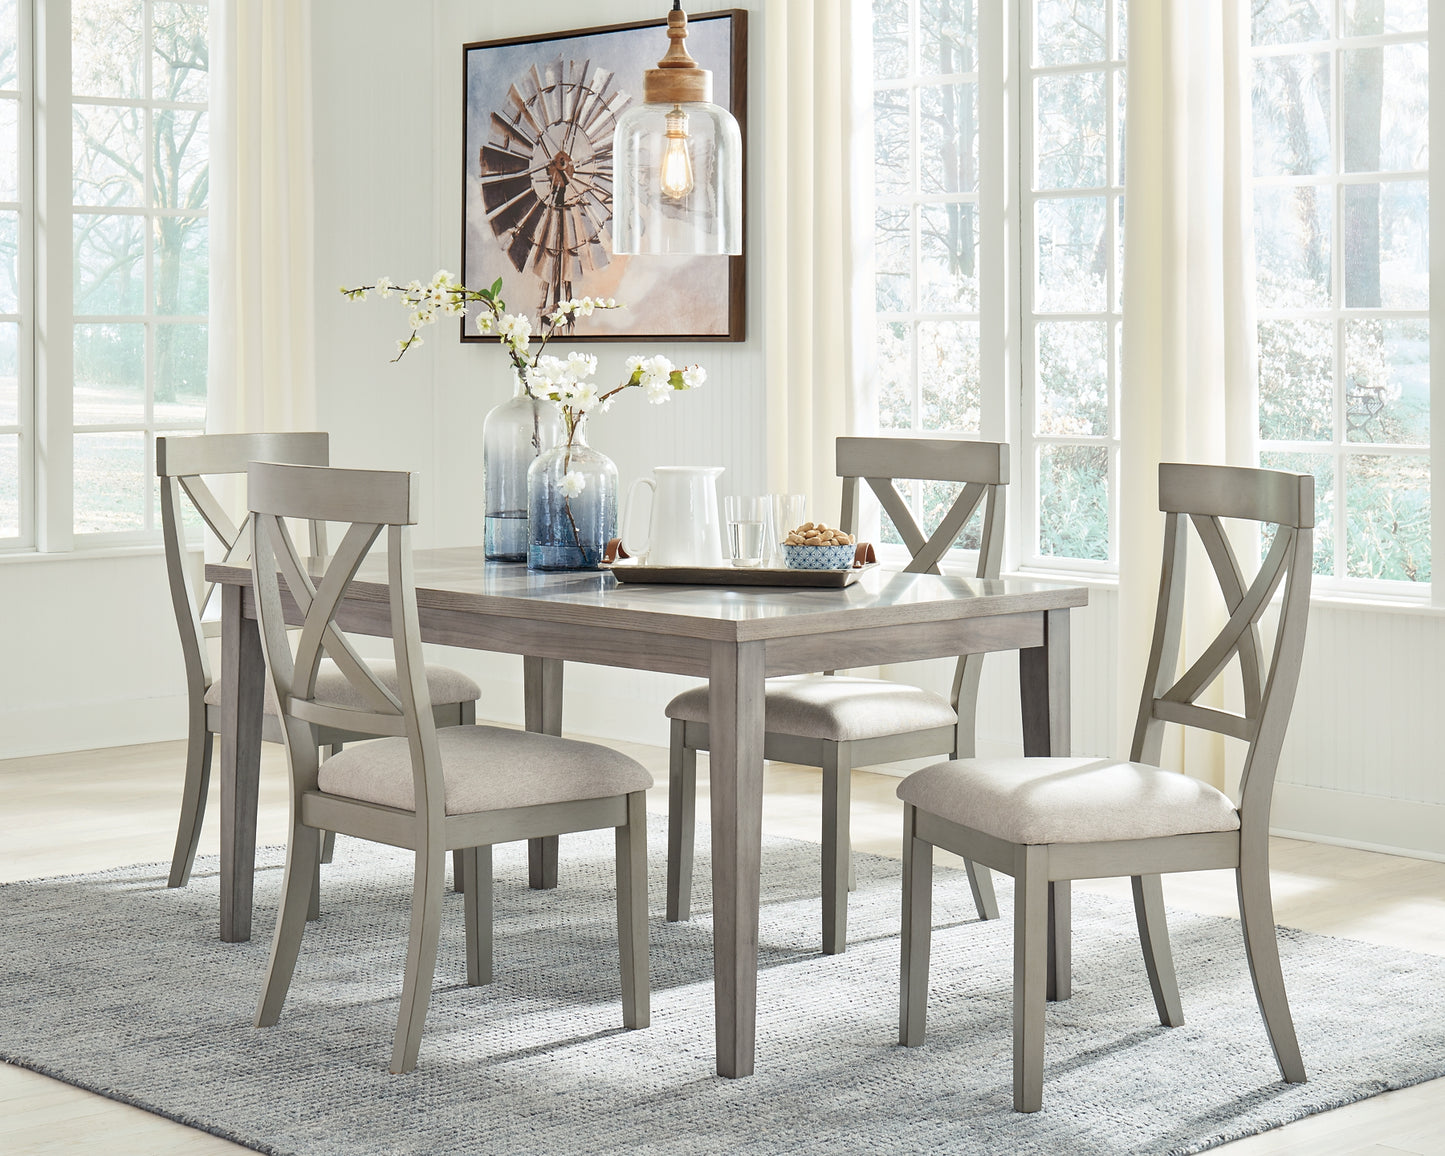 Parellen Dining Table and 4 Chairs